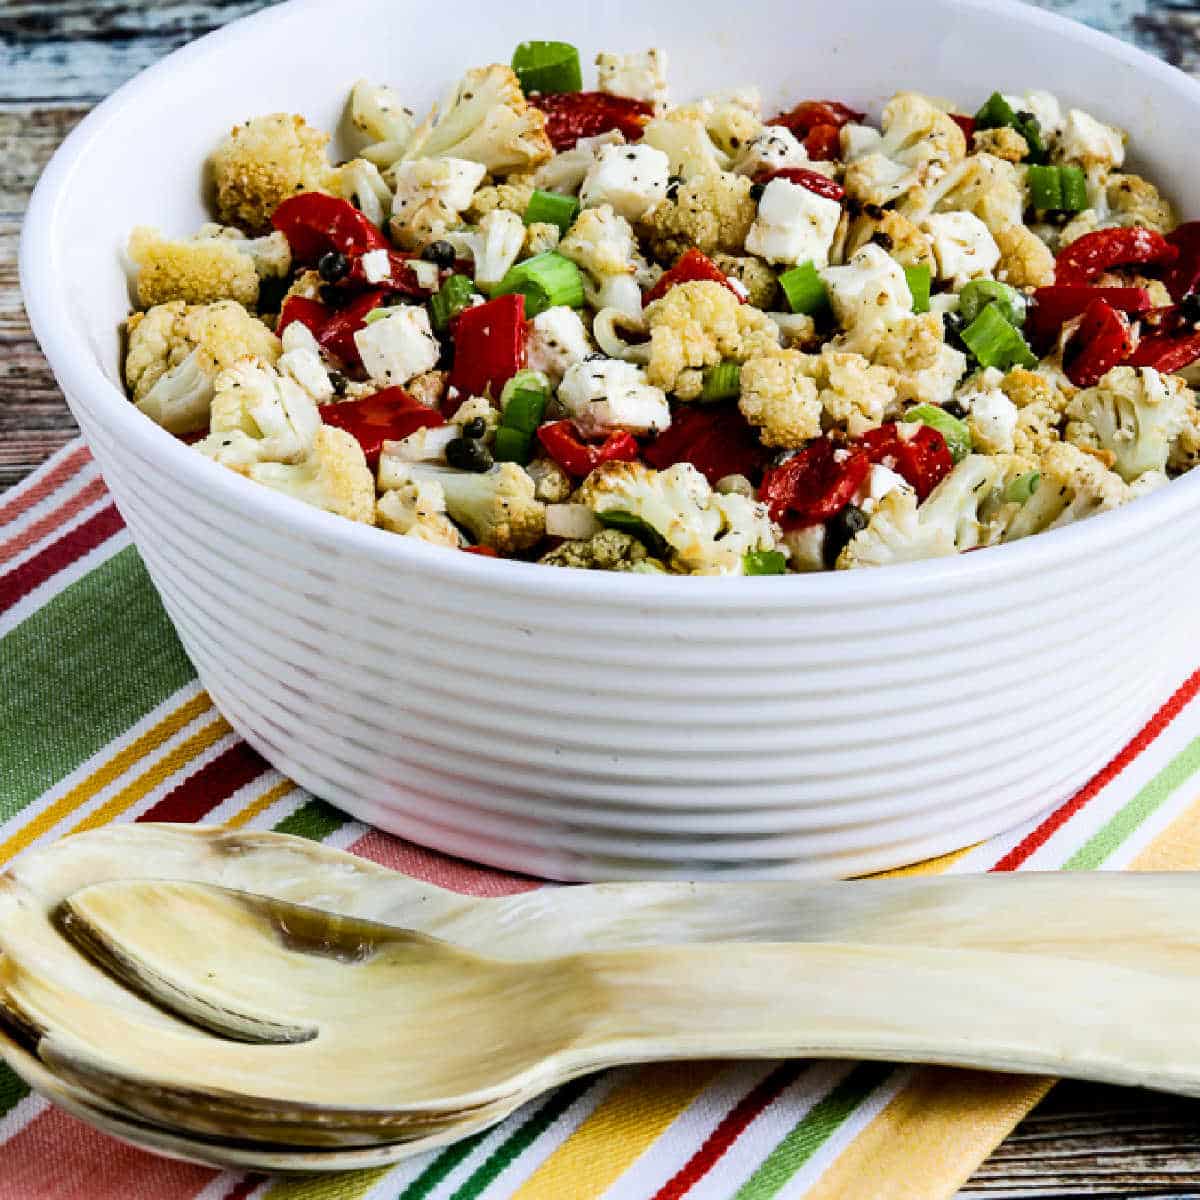 Roasted Cauliflower Salad with Feta, Capers, and Red Pepper shown in serving bowl with large fork.